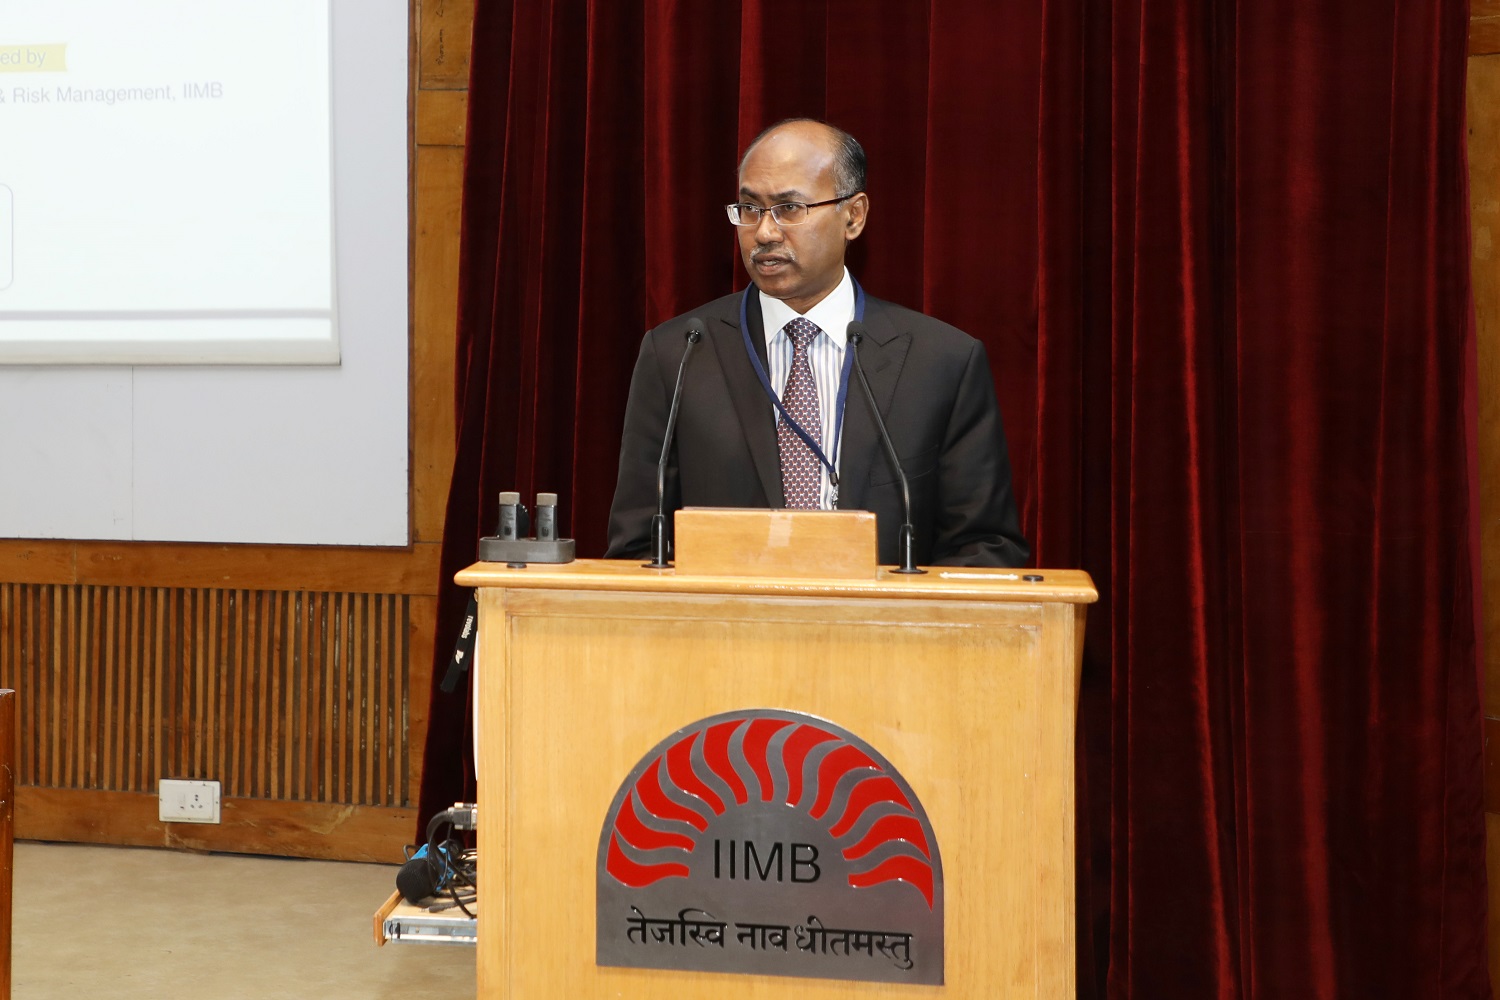 Hon’ble Justice Kannan Ramesh, Judge, Appellate Division, Supreme Court of Singapore and Judge, Singapore International Commercial Court, delivers a talk during the inaugural session of the conference.